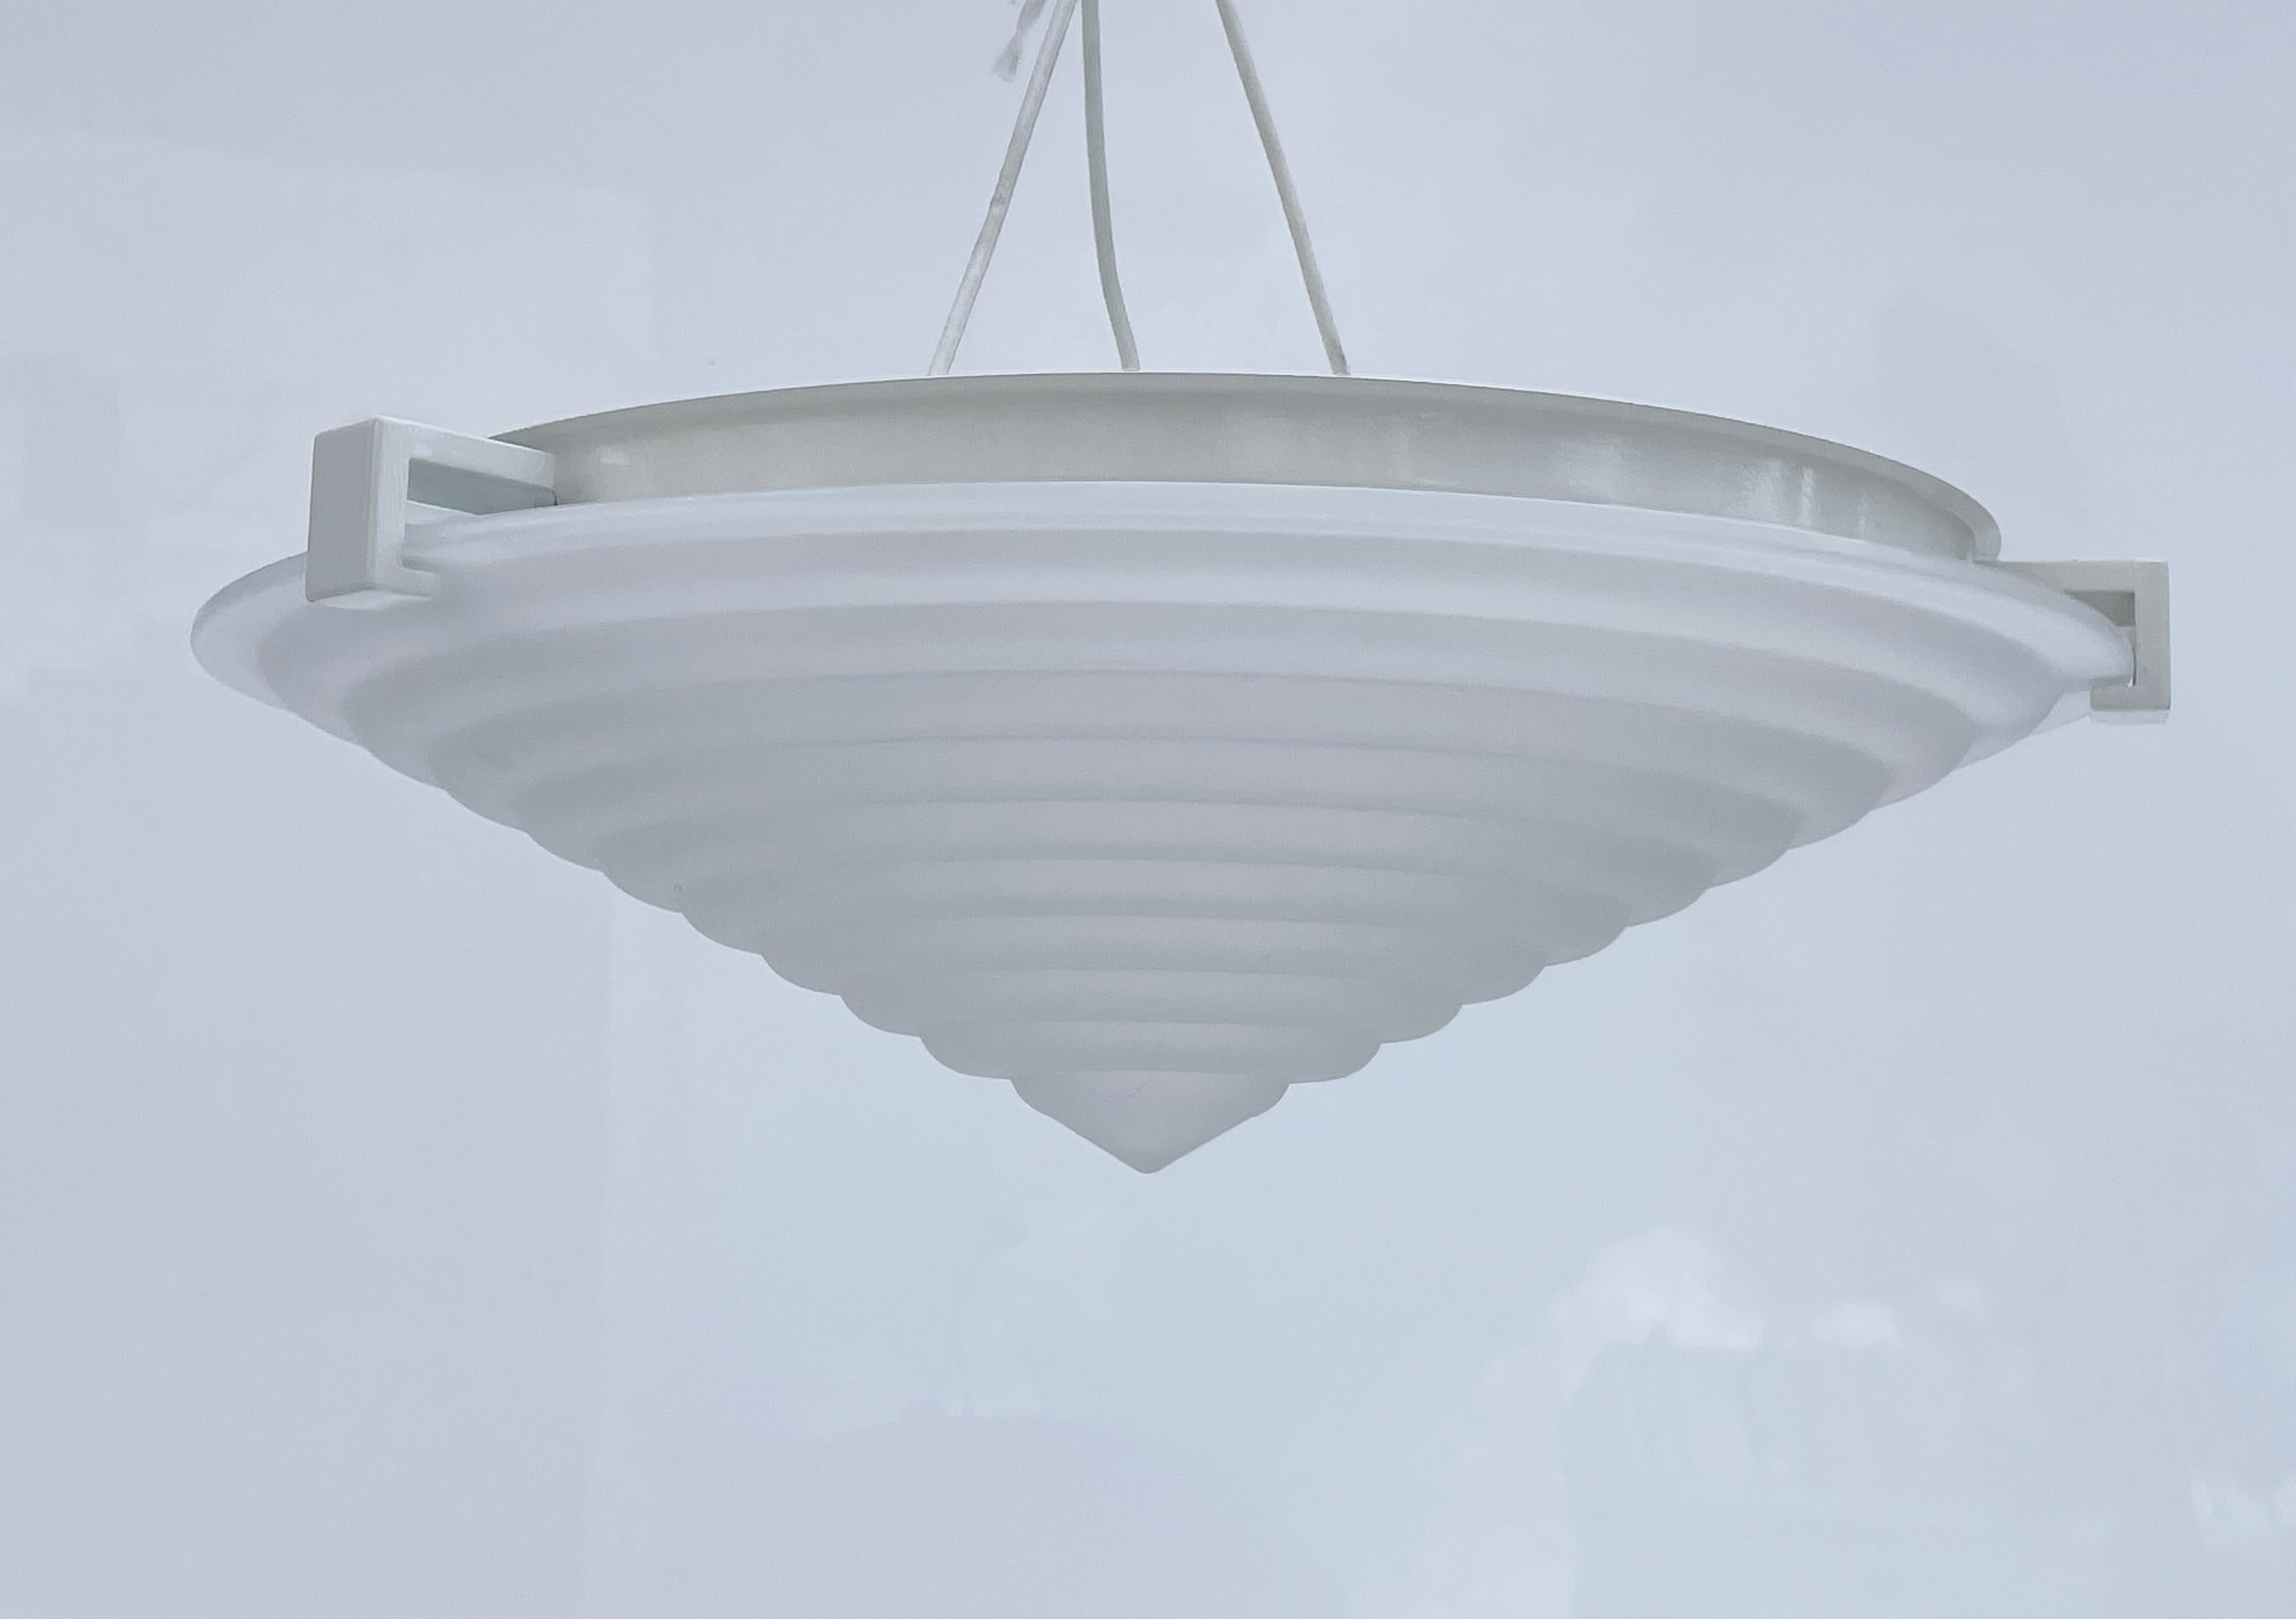 Beautiful ceiling light designed and manufactured in Italy by Angelo Mangiarotti for Artemide.
The piece has a beautiful frosted glass shade with a conical shape and a white metal frame.

Measurements:
16 inches in diameter x 6 inches high plus